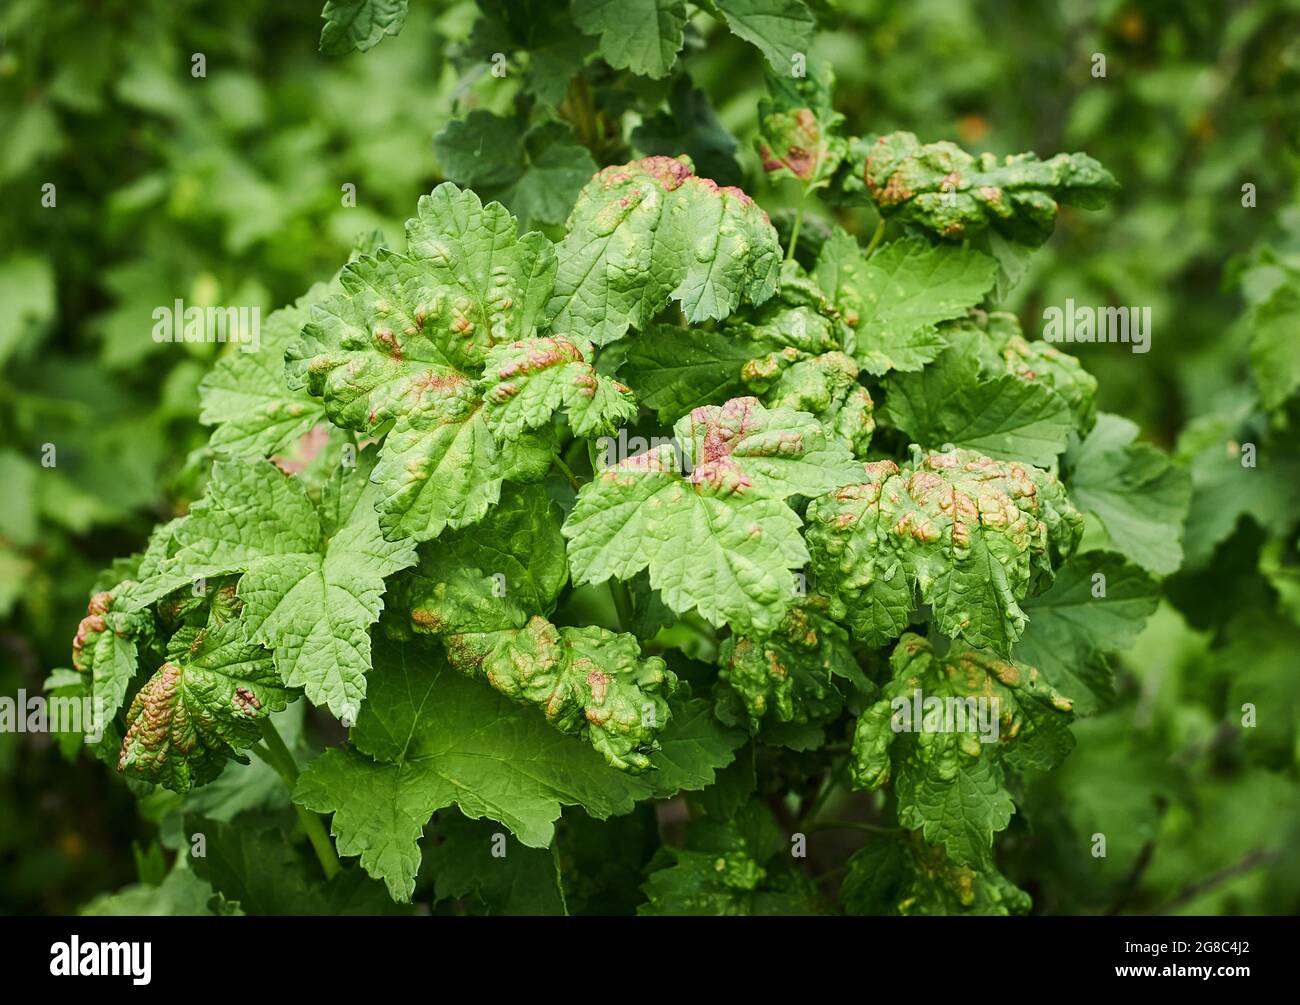 Peach leaf curl on currant leaves. Common Plant Diseases. Puckered or blistered leaves distorted by pale yellow aphids. Man holding reddish or Stock Photo